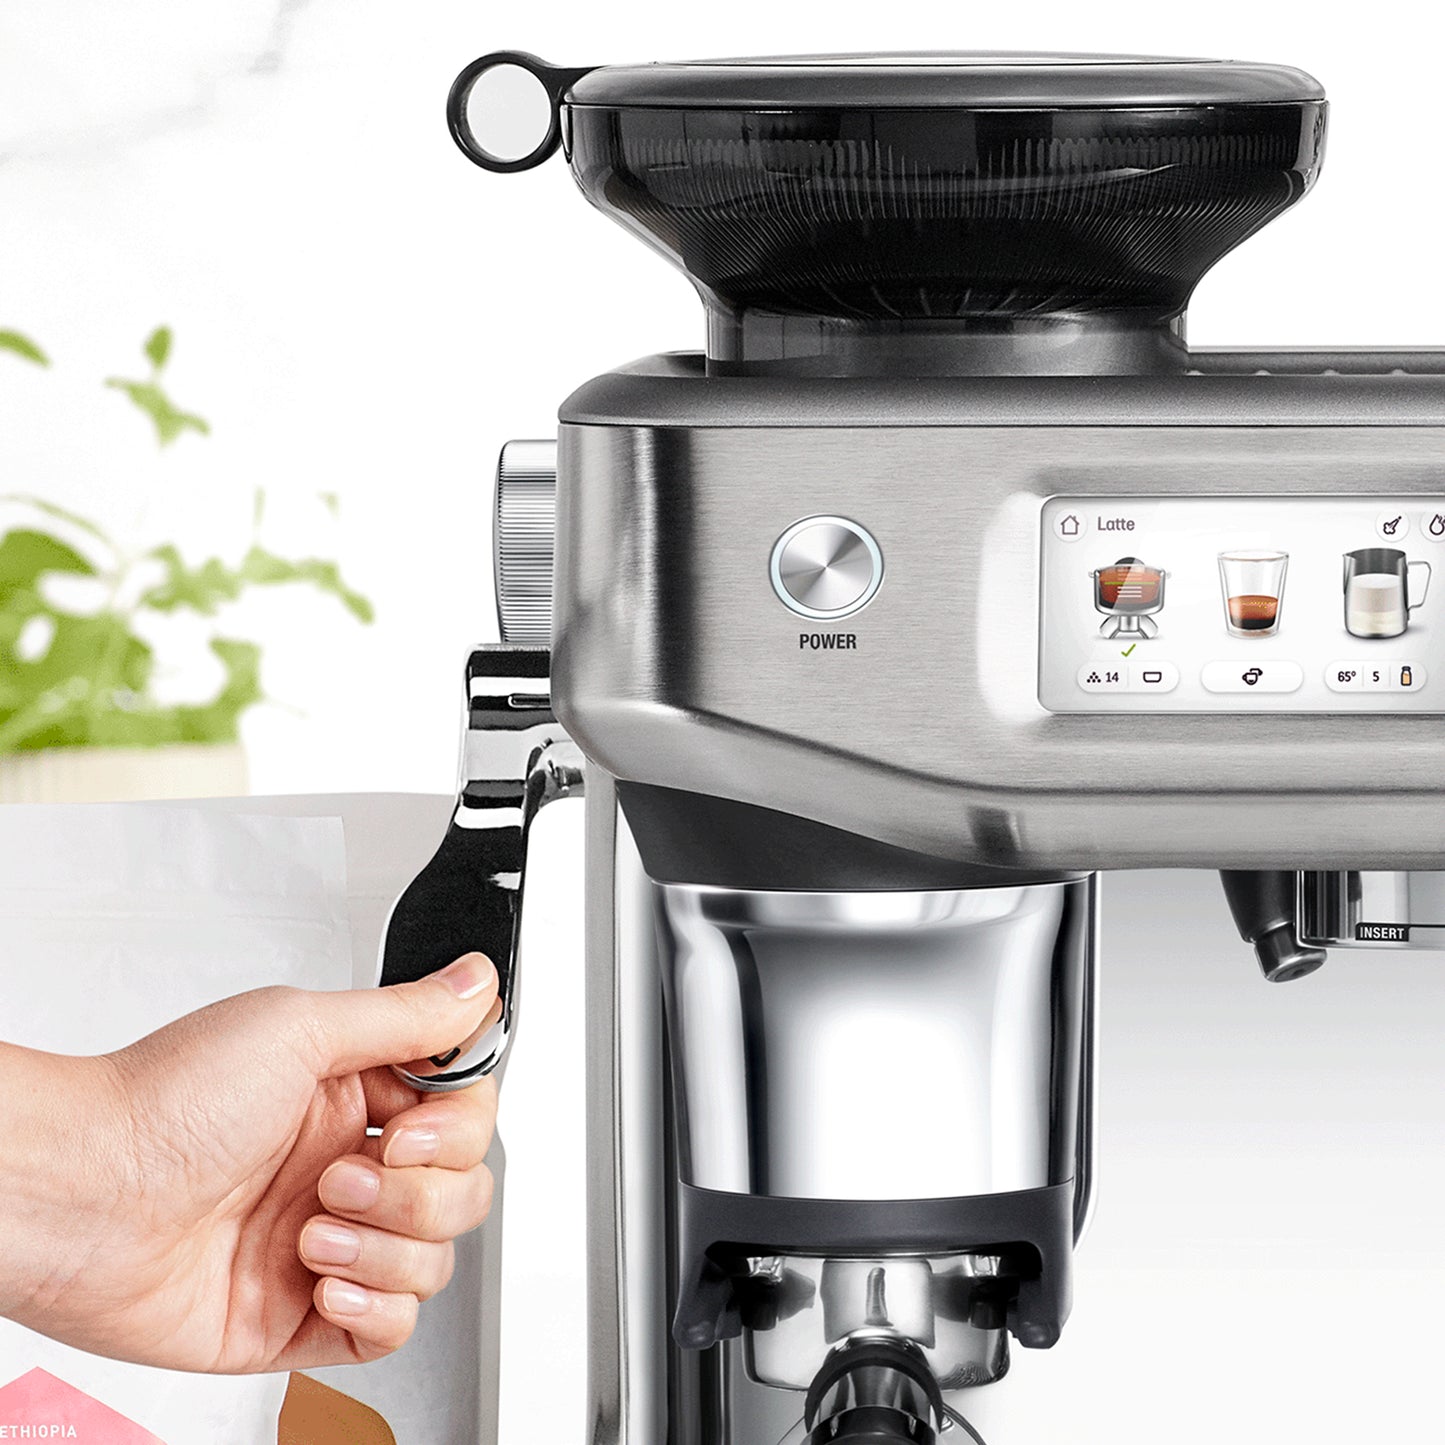 Image of the Sage Barista Touch Impress espresso machine, featuring its automatic tamping system.